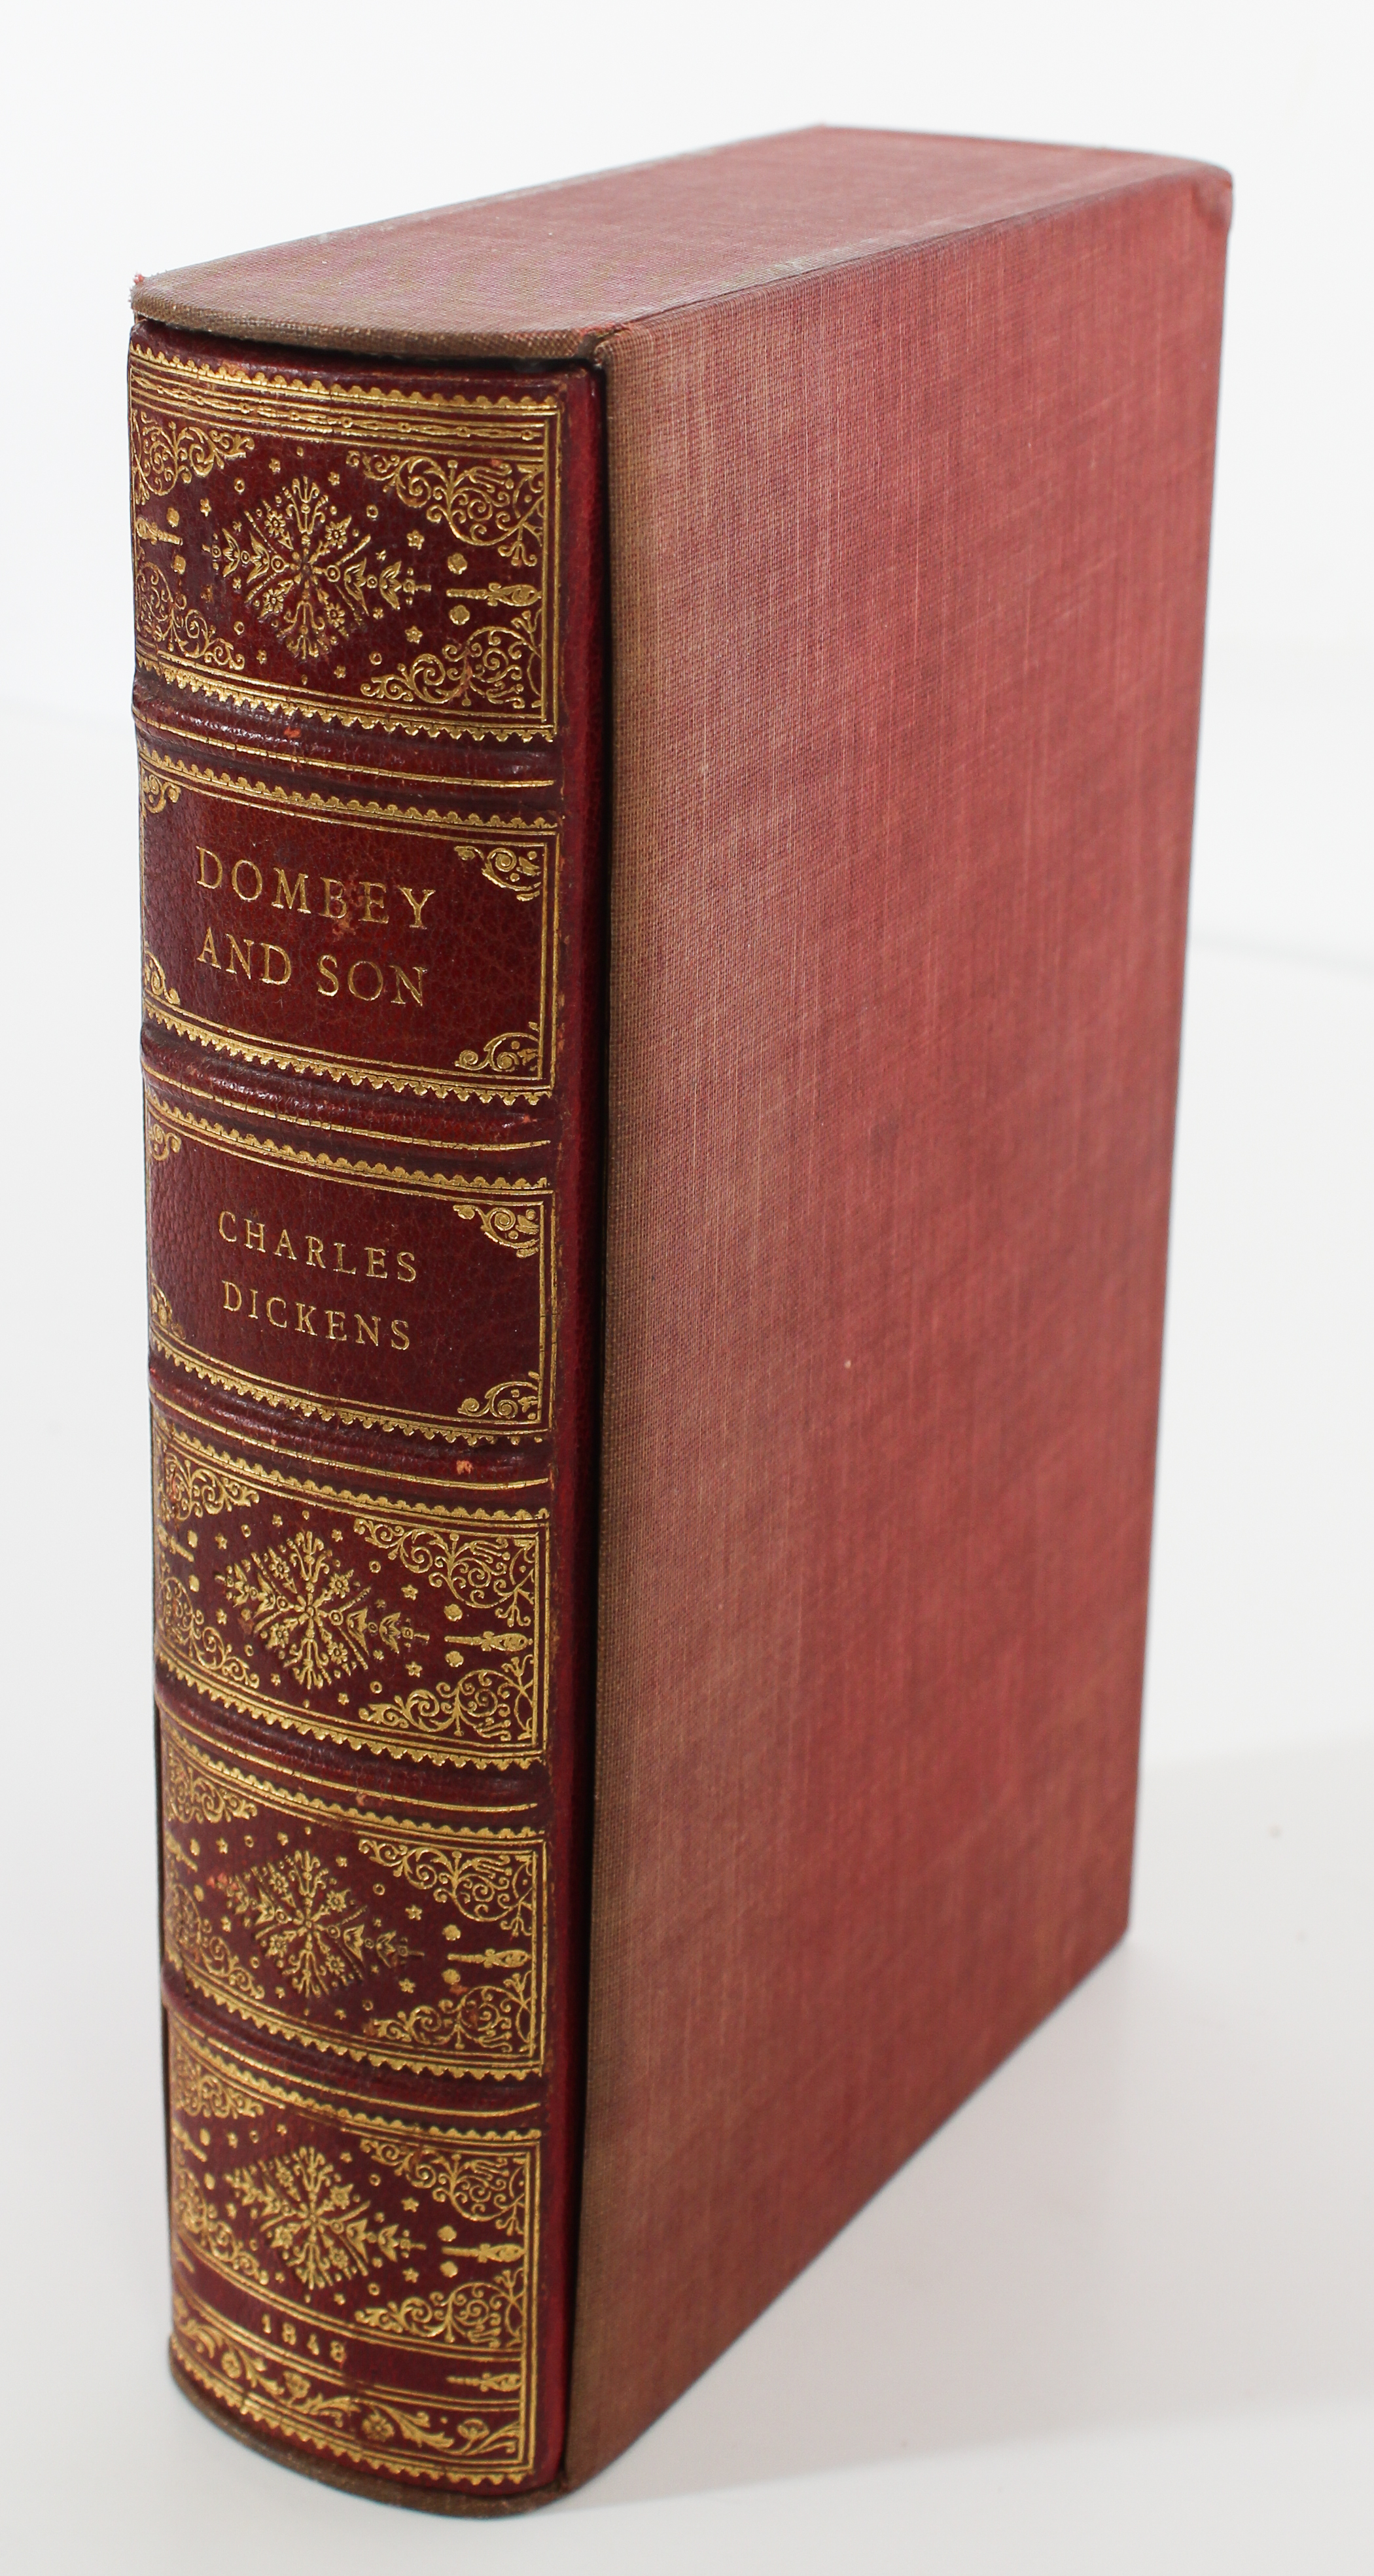 Charles Dickens, Dombey & Son, 1st Ed 1848 - Image 2 of 5